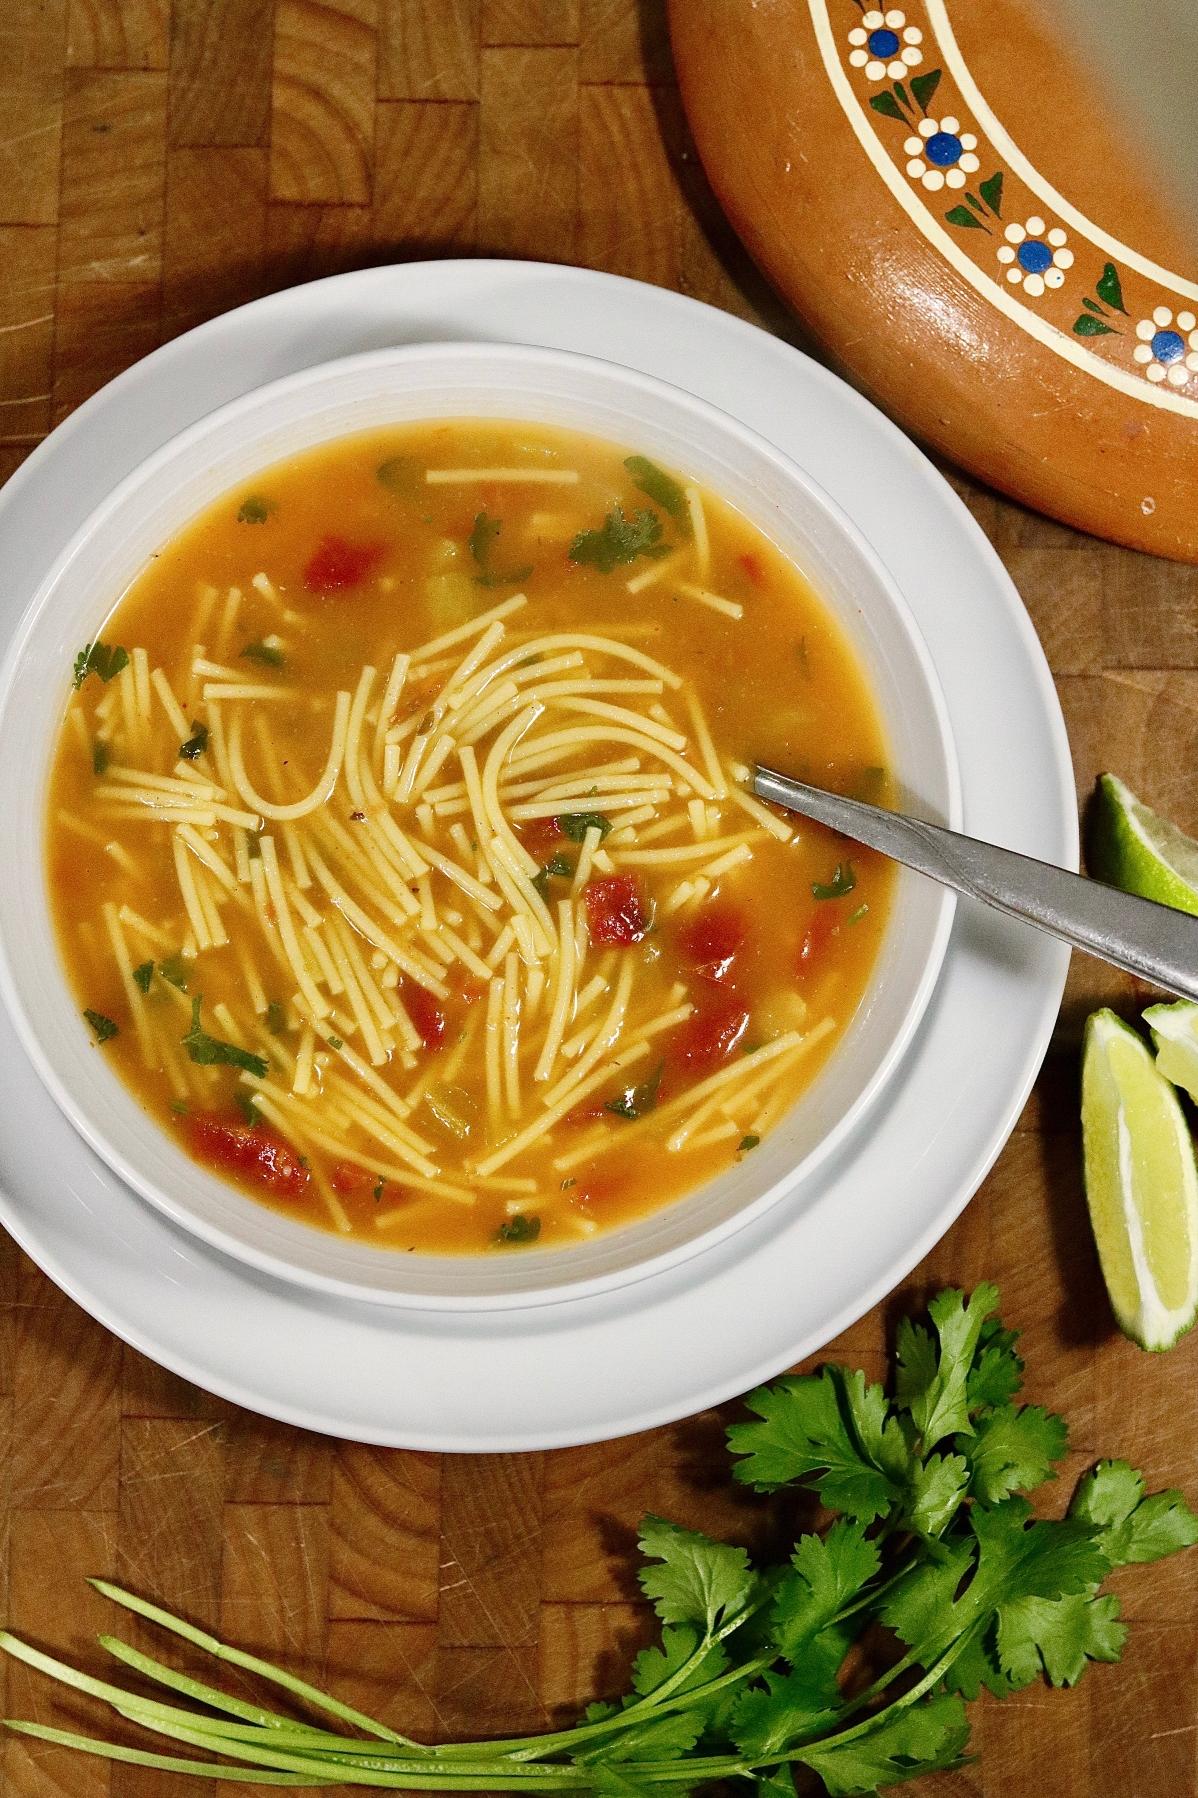  A versatile soup that can be enjoyed as a main or side dish